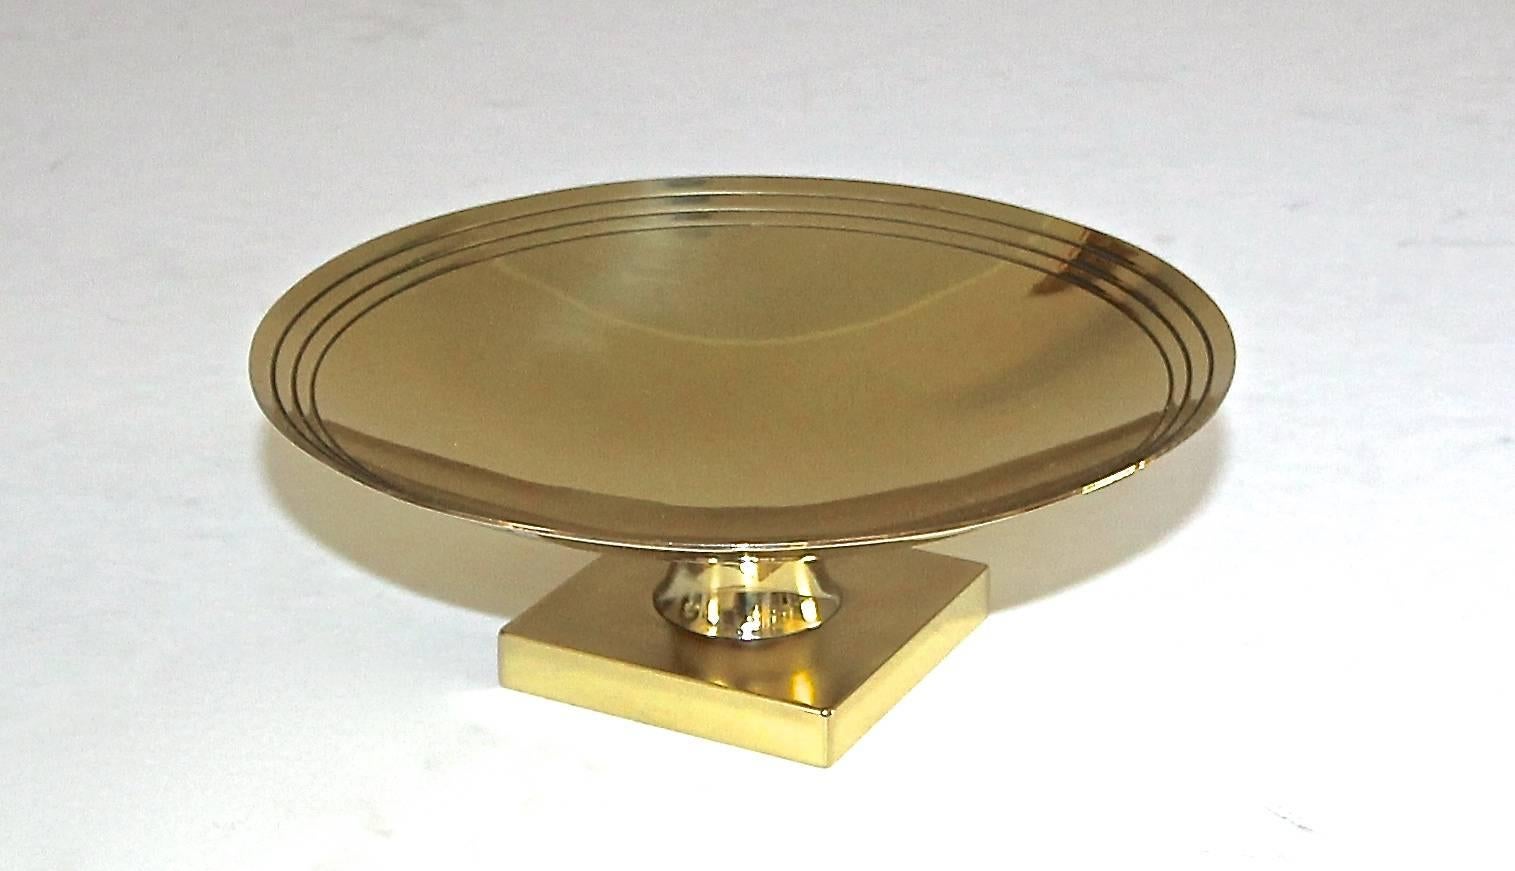 Footed brass round compote by Tommi Parzinger for Vincent Lippe/Dorlyn Silversmiths, New York. Each element of the Dorlyn accessories was handcrafted from sheet brass in New York. Stamped Dorlyn Silversmiths. The compote has been professionally